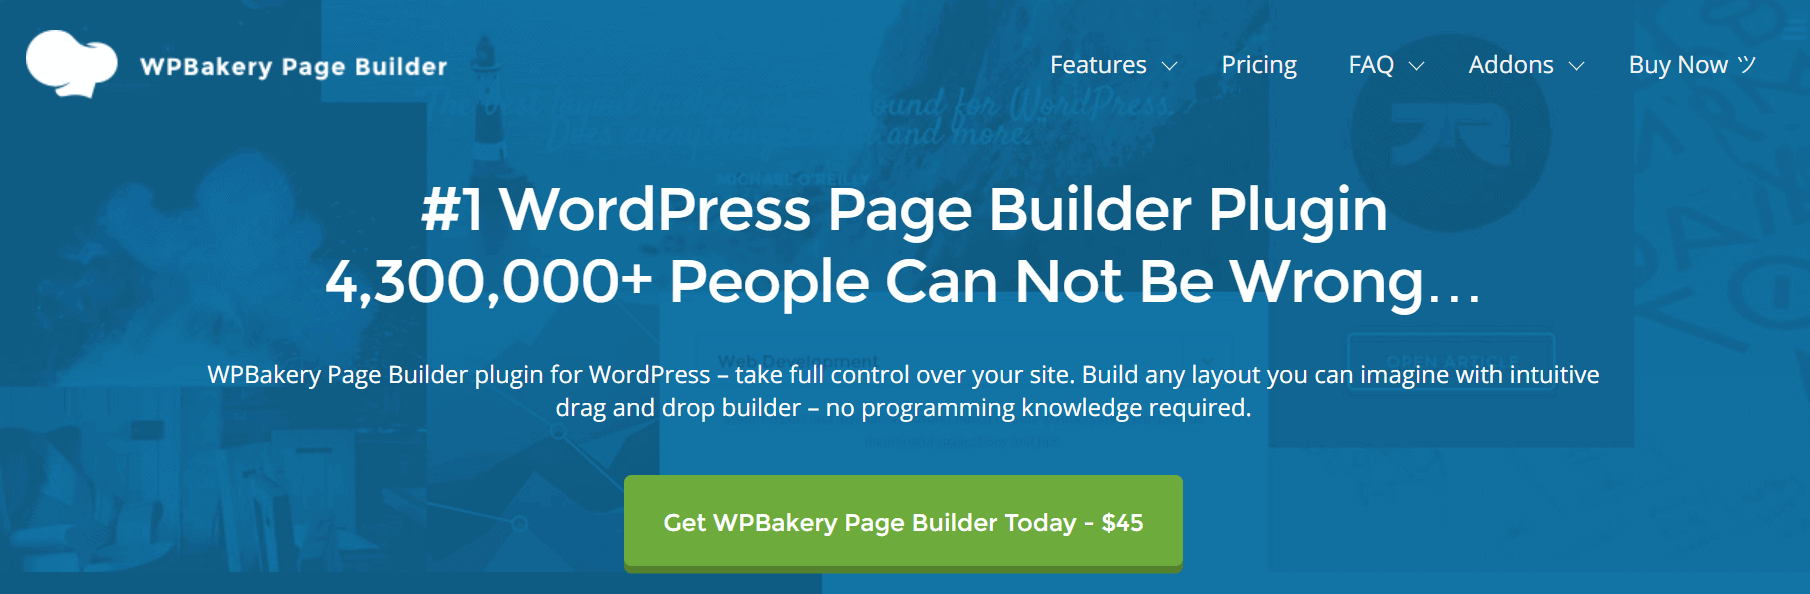 wpbakery page builder - Best WordPress Front End Editing Plugins